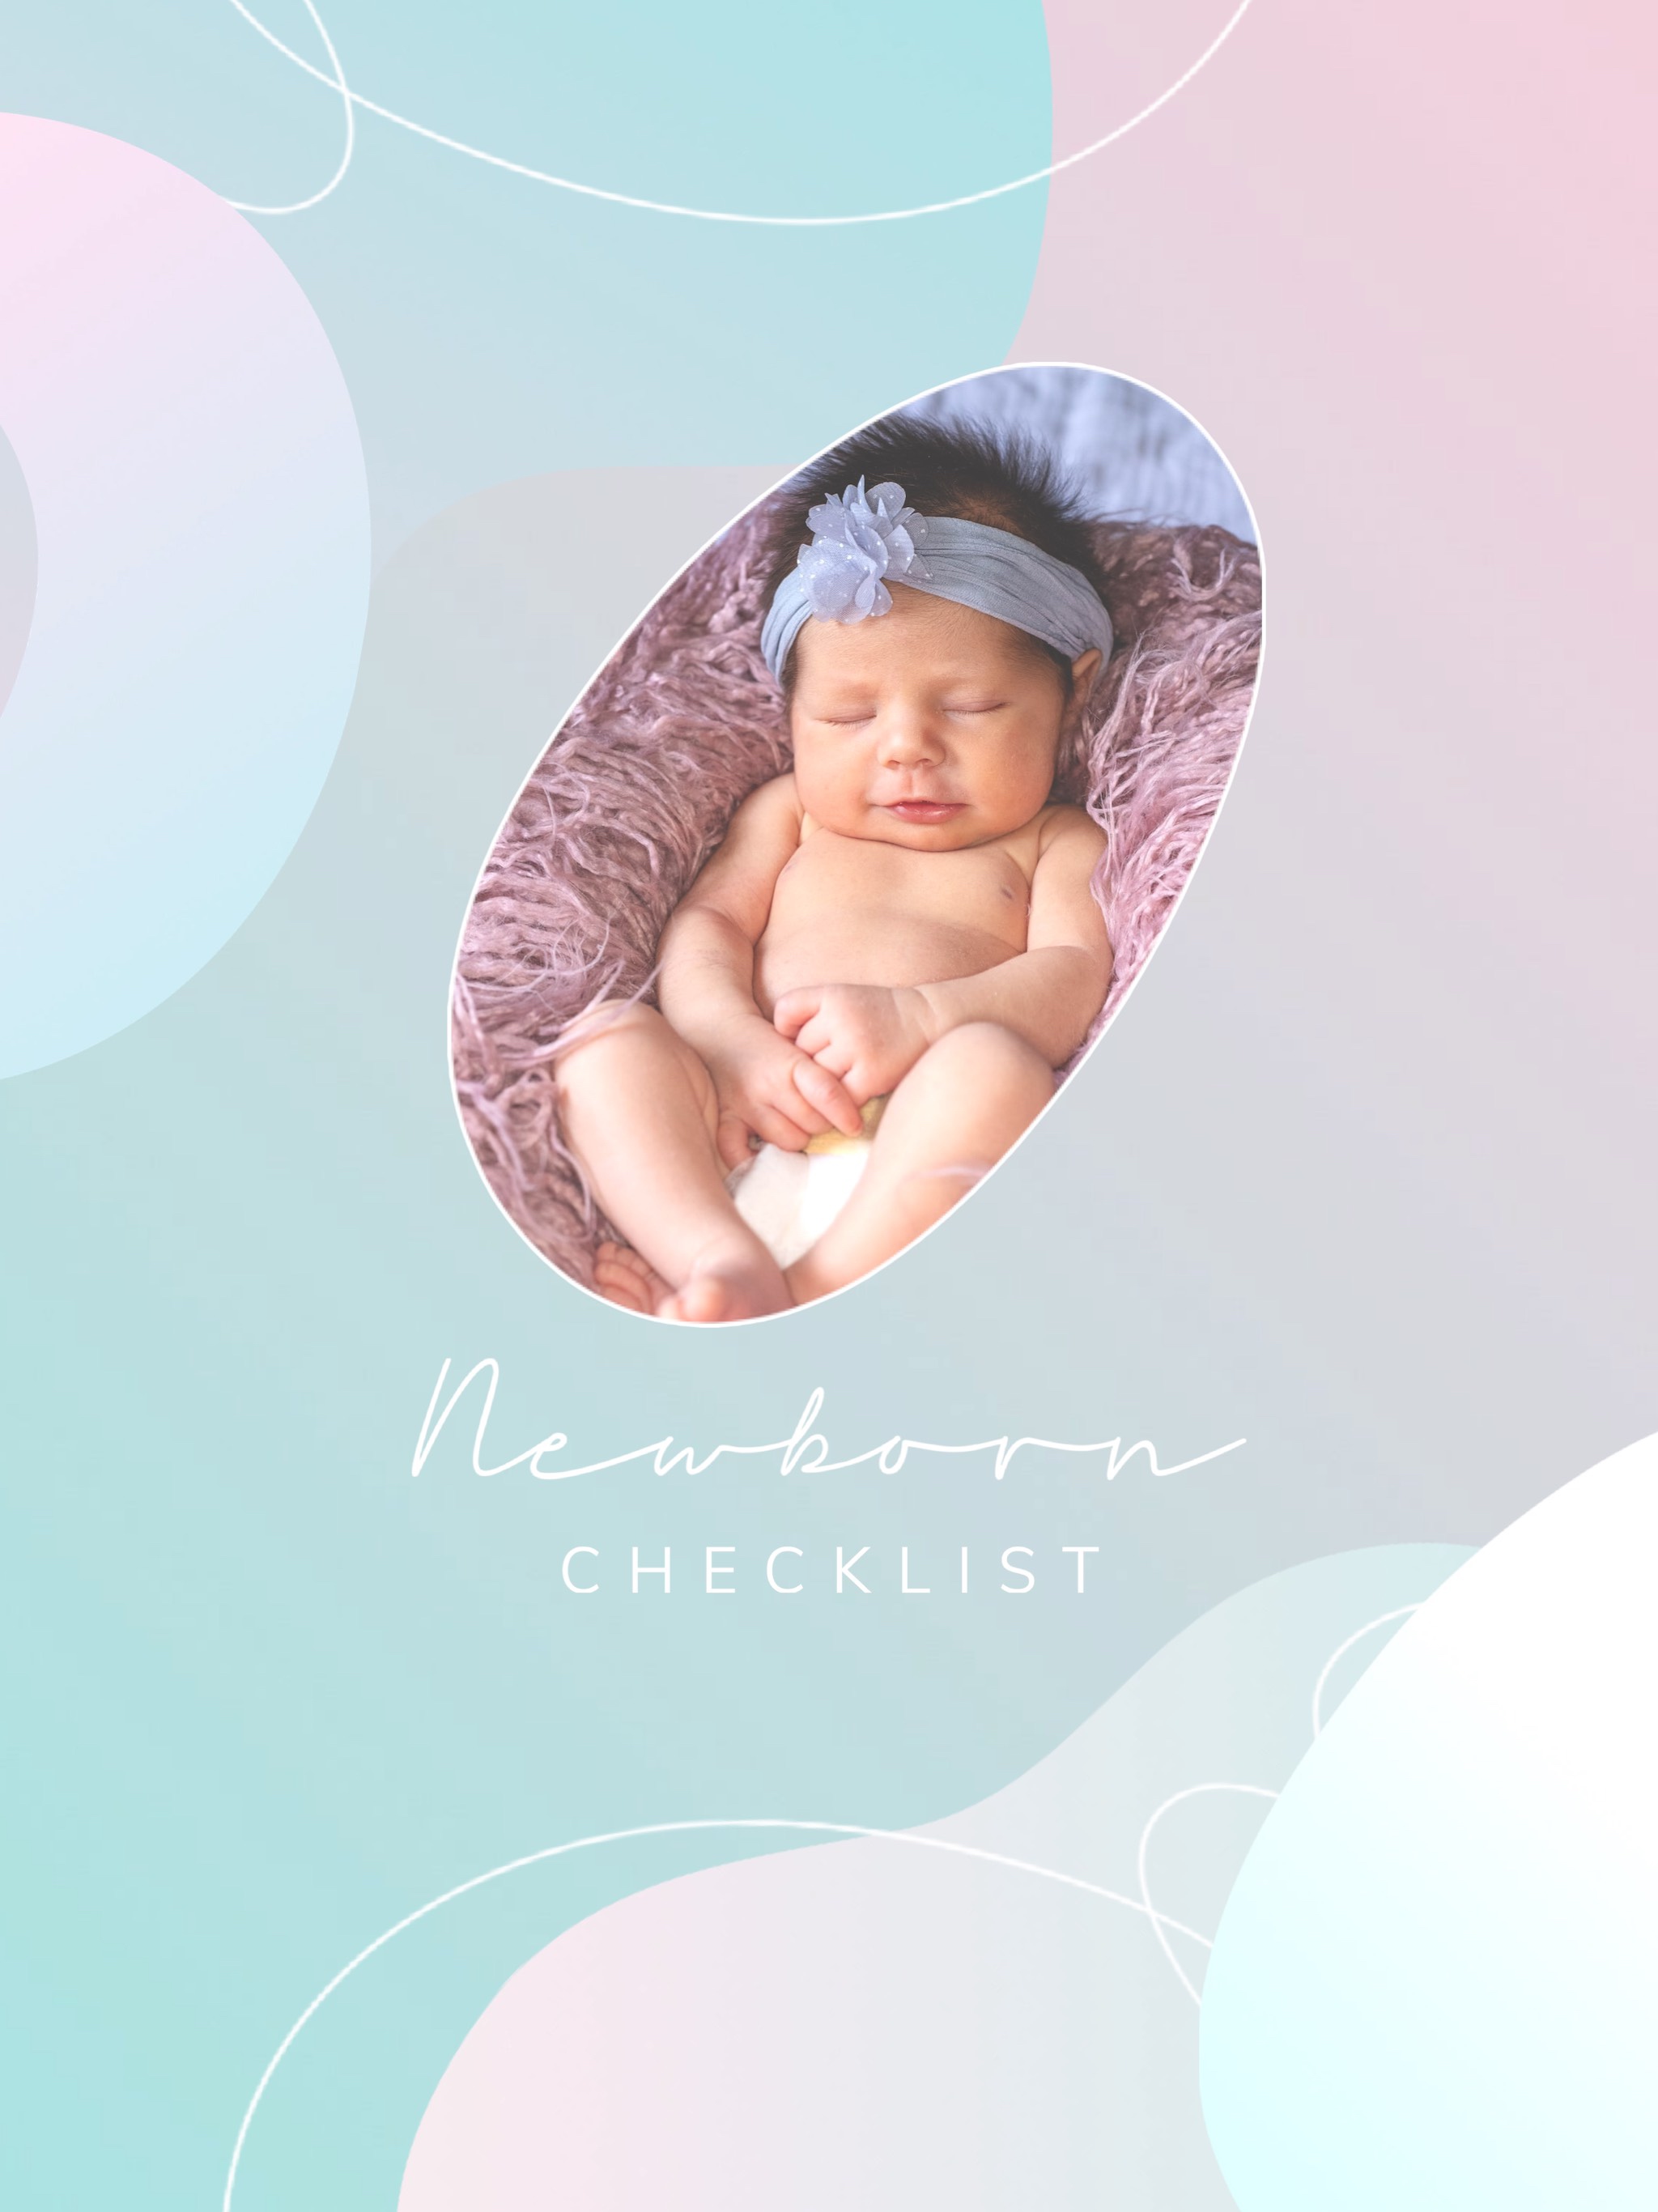 A Photo Of A Newborn Girl With A Blue Headband Baby Template